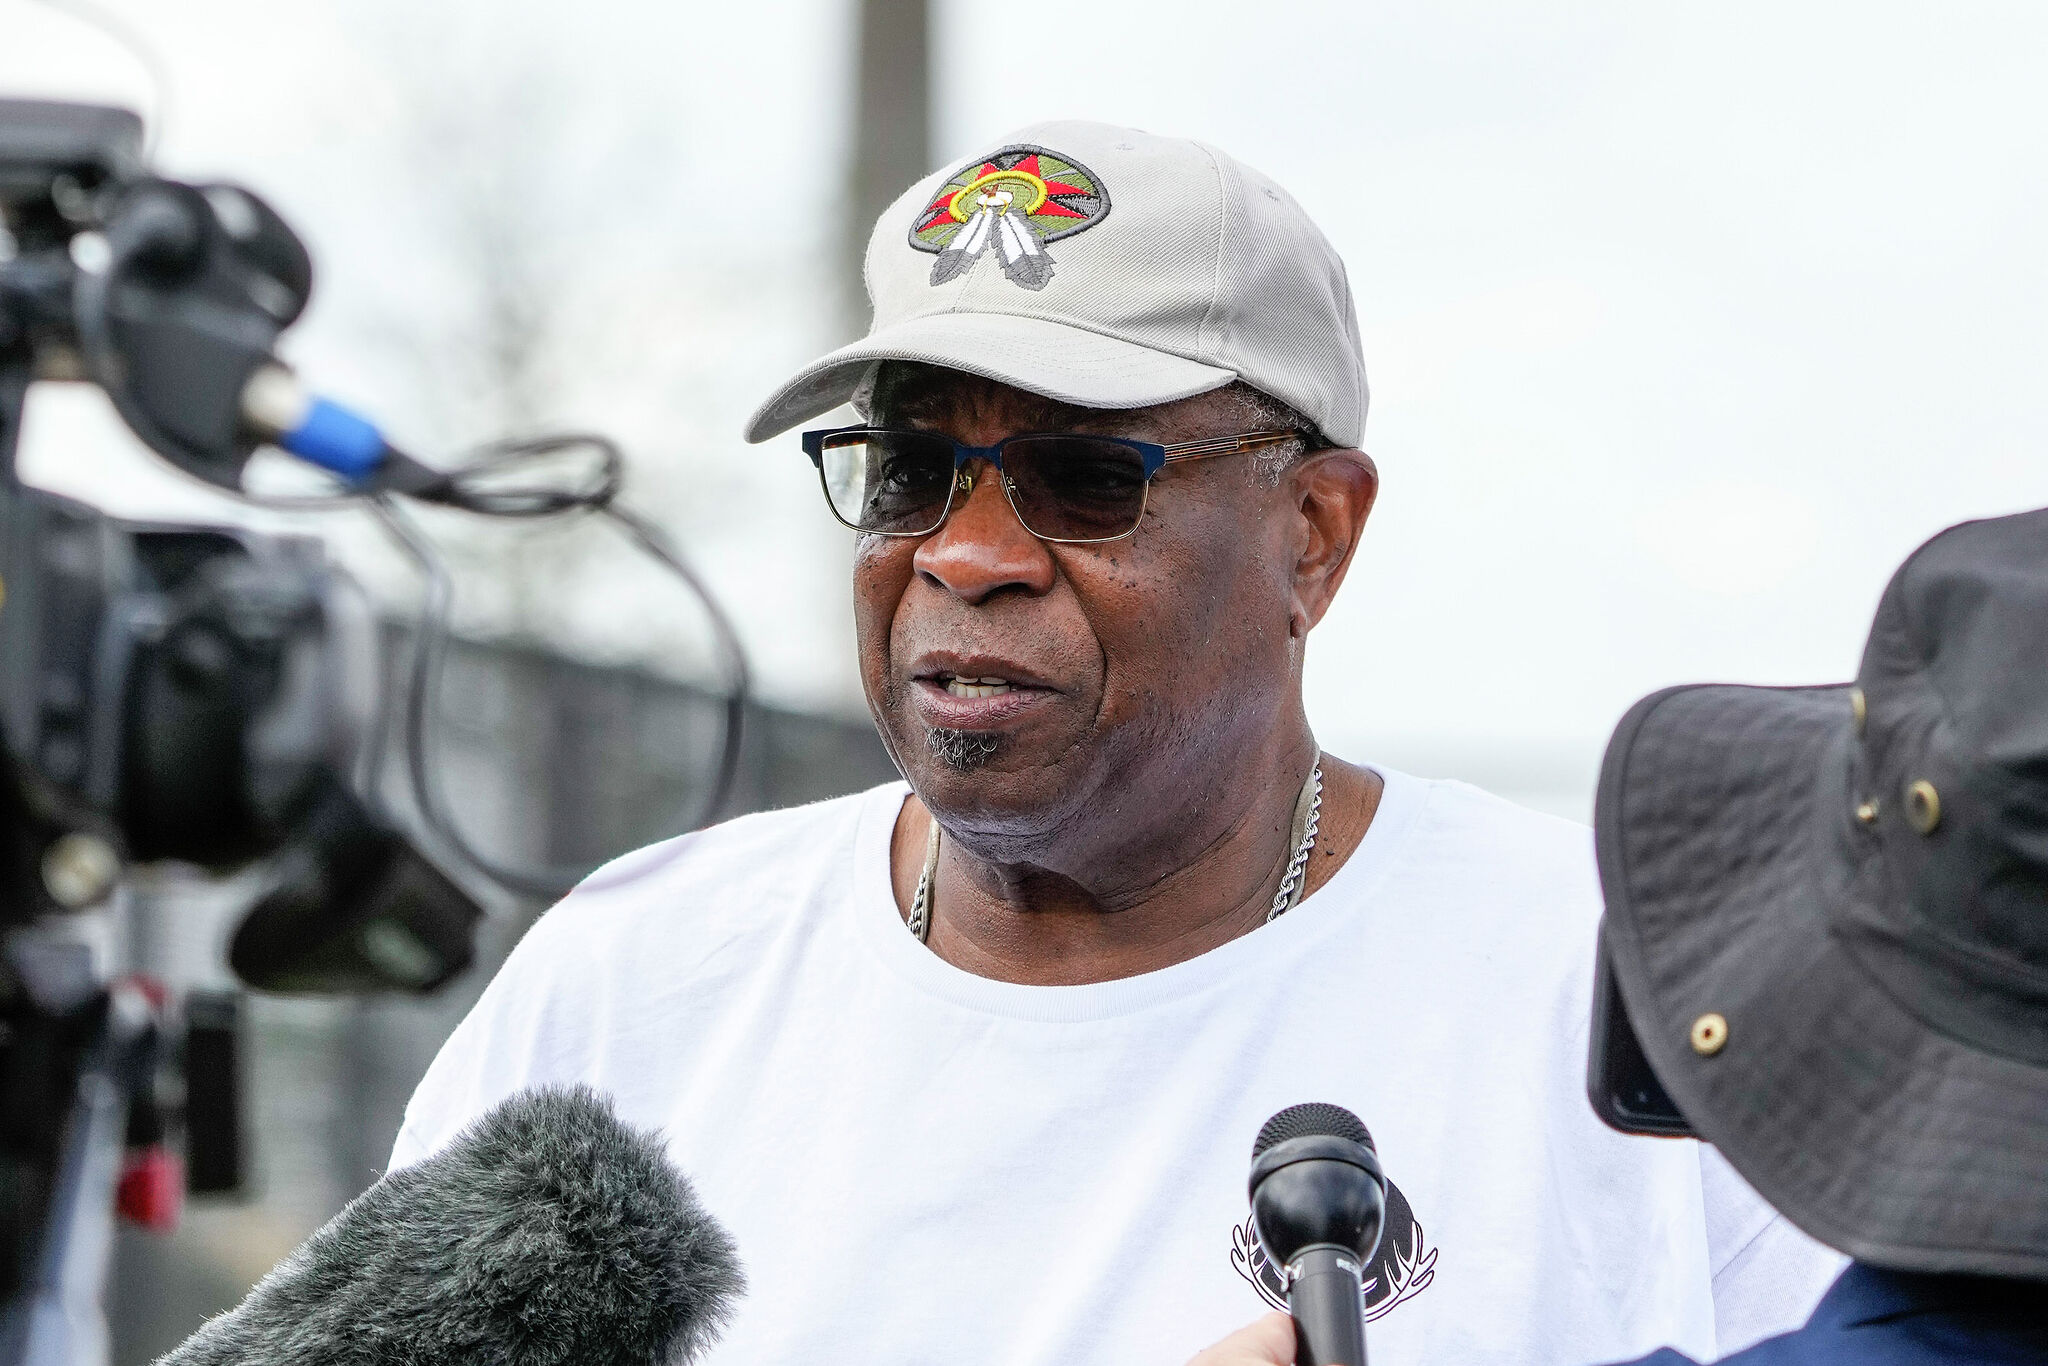 Houston Astros: Dusty Baker's mind on the present in pursuit of repeat